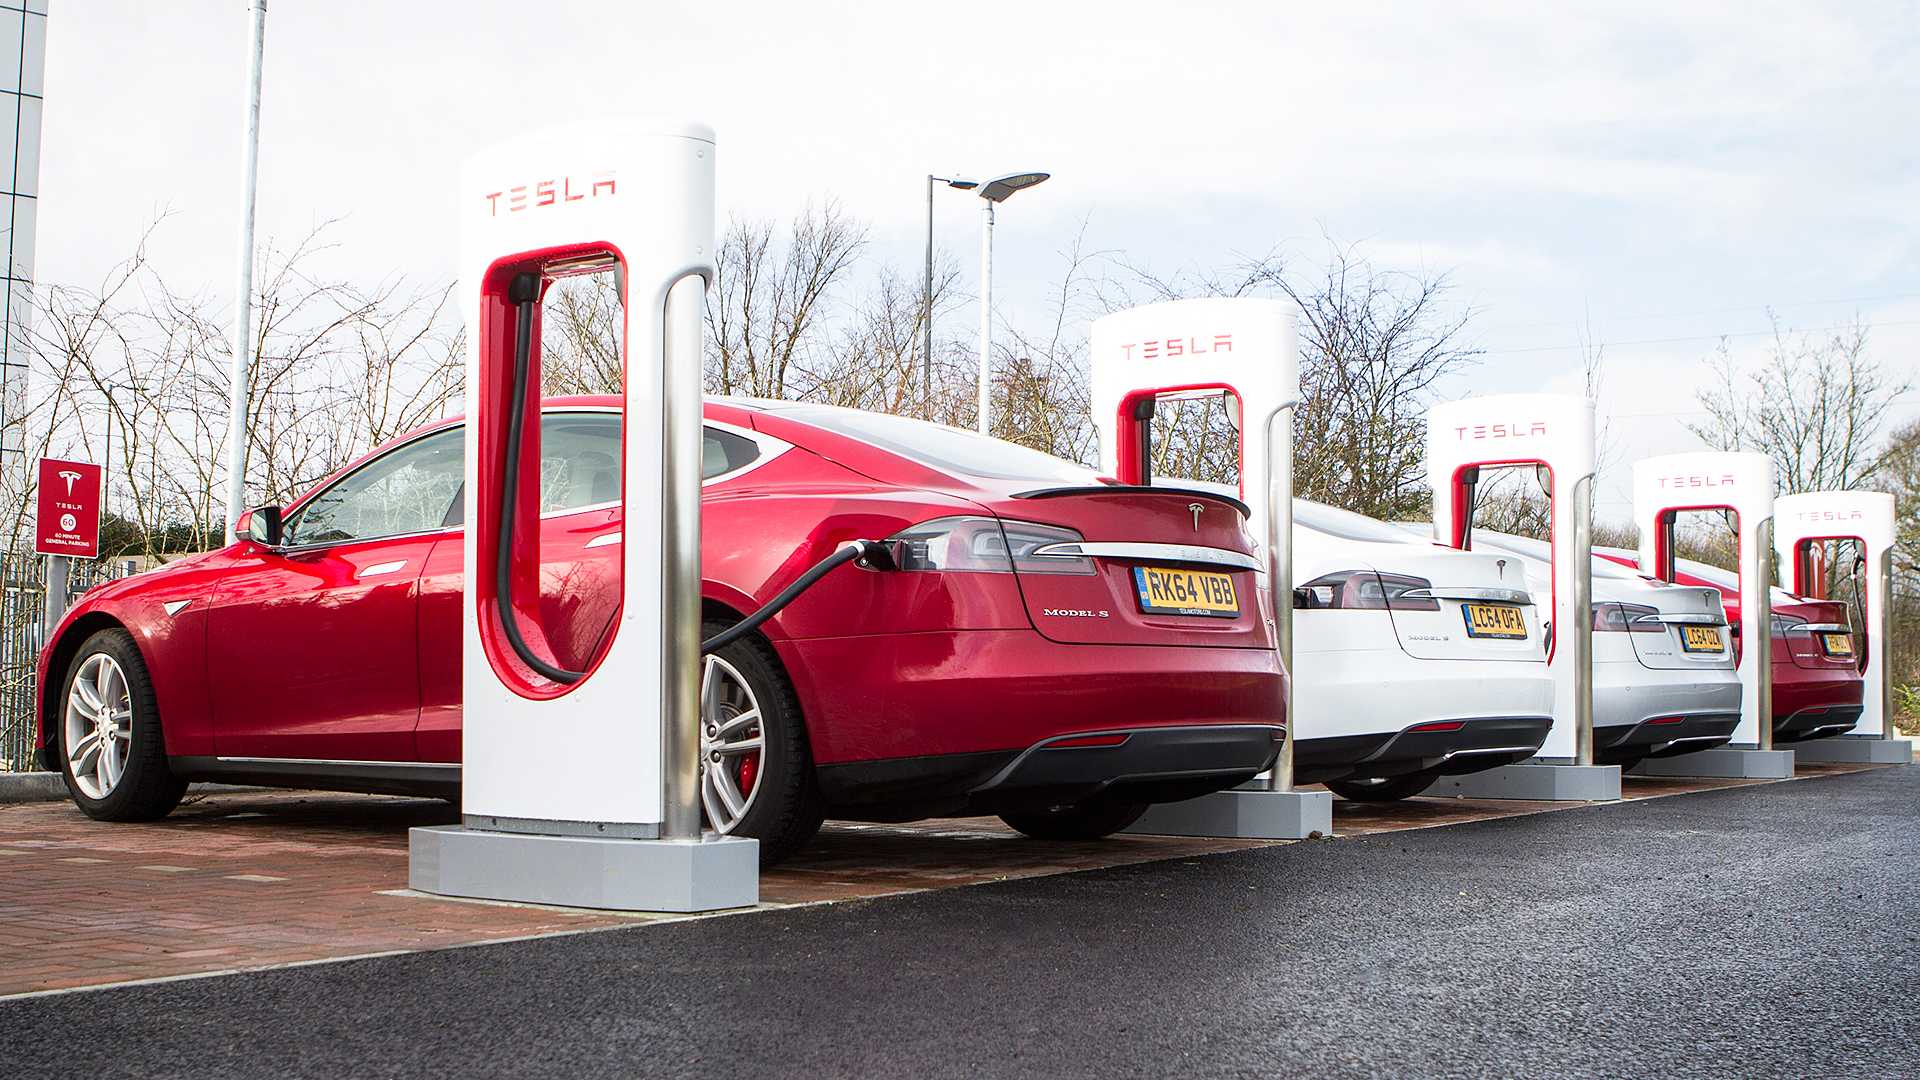 Tesla releases Supercharger for other electric cars